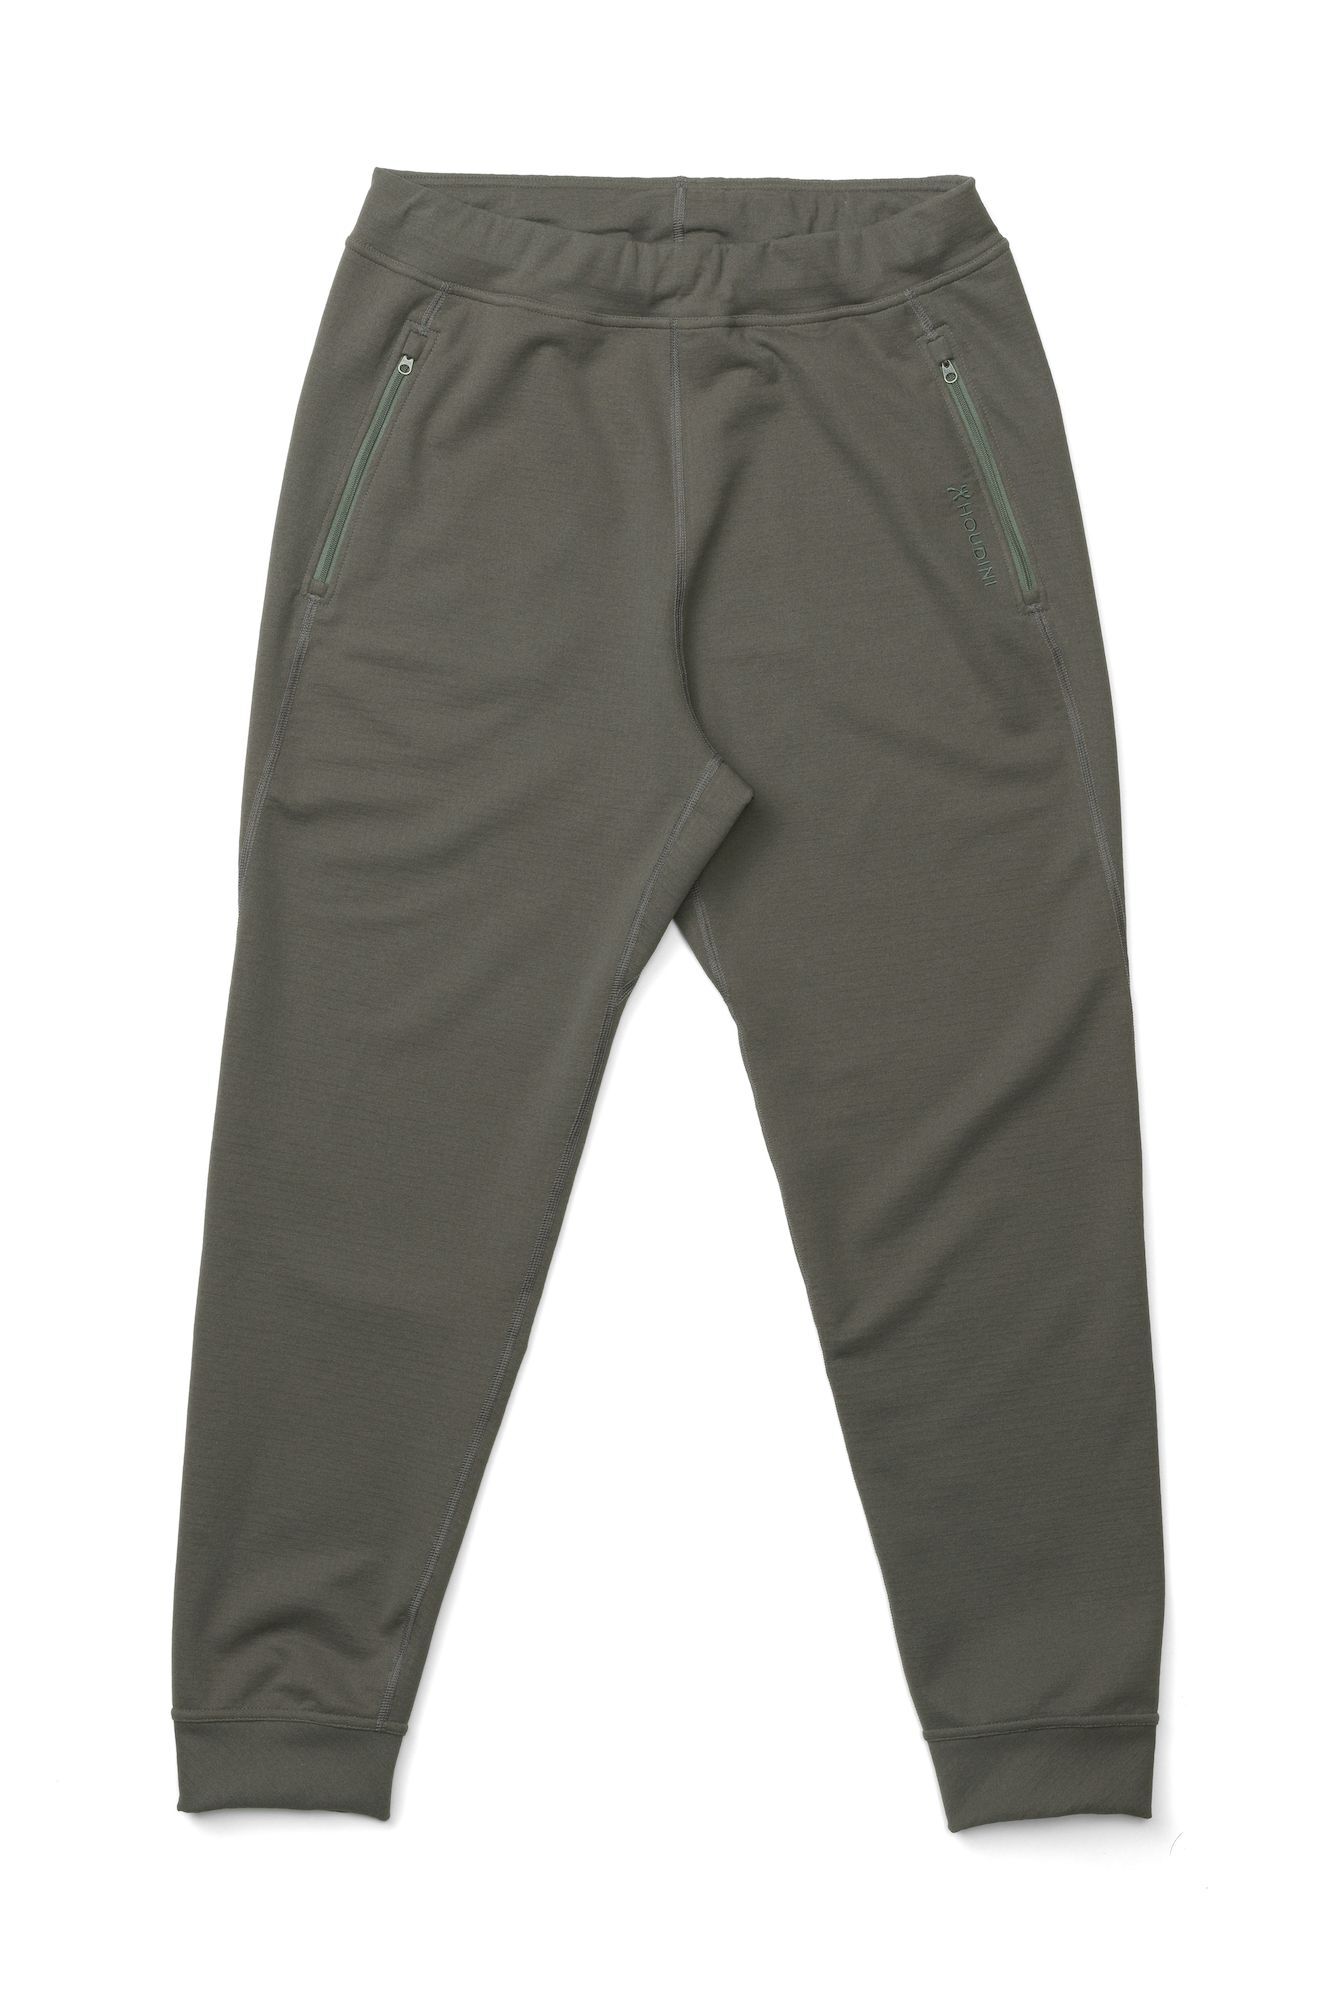 Houdini Sportswear Mono Air Pants - Collant thermique homme | Hardloop